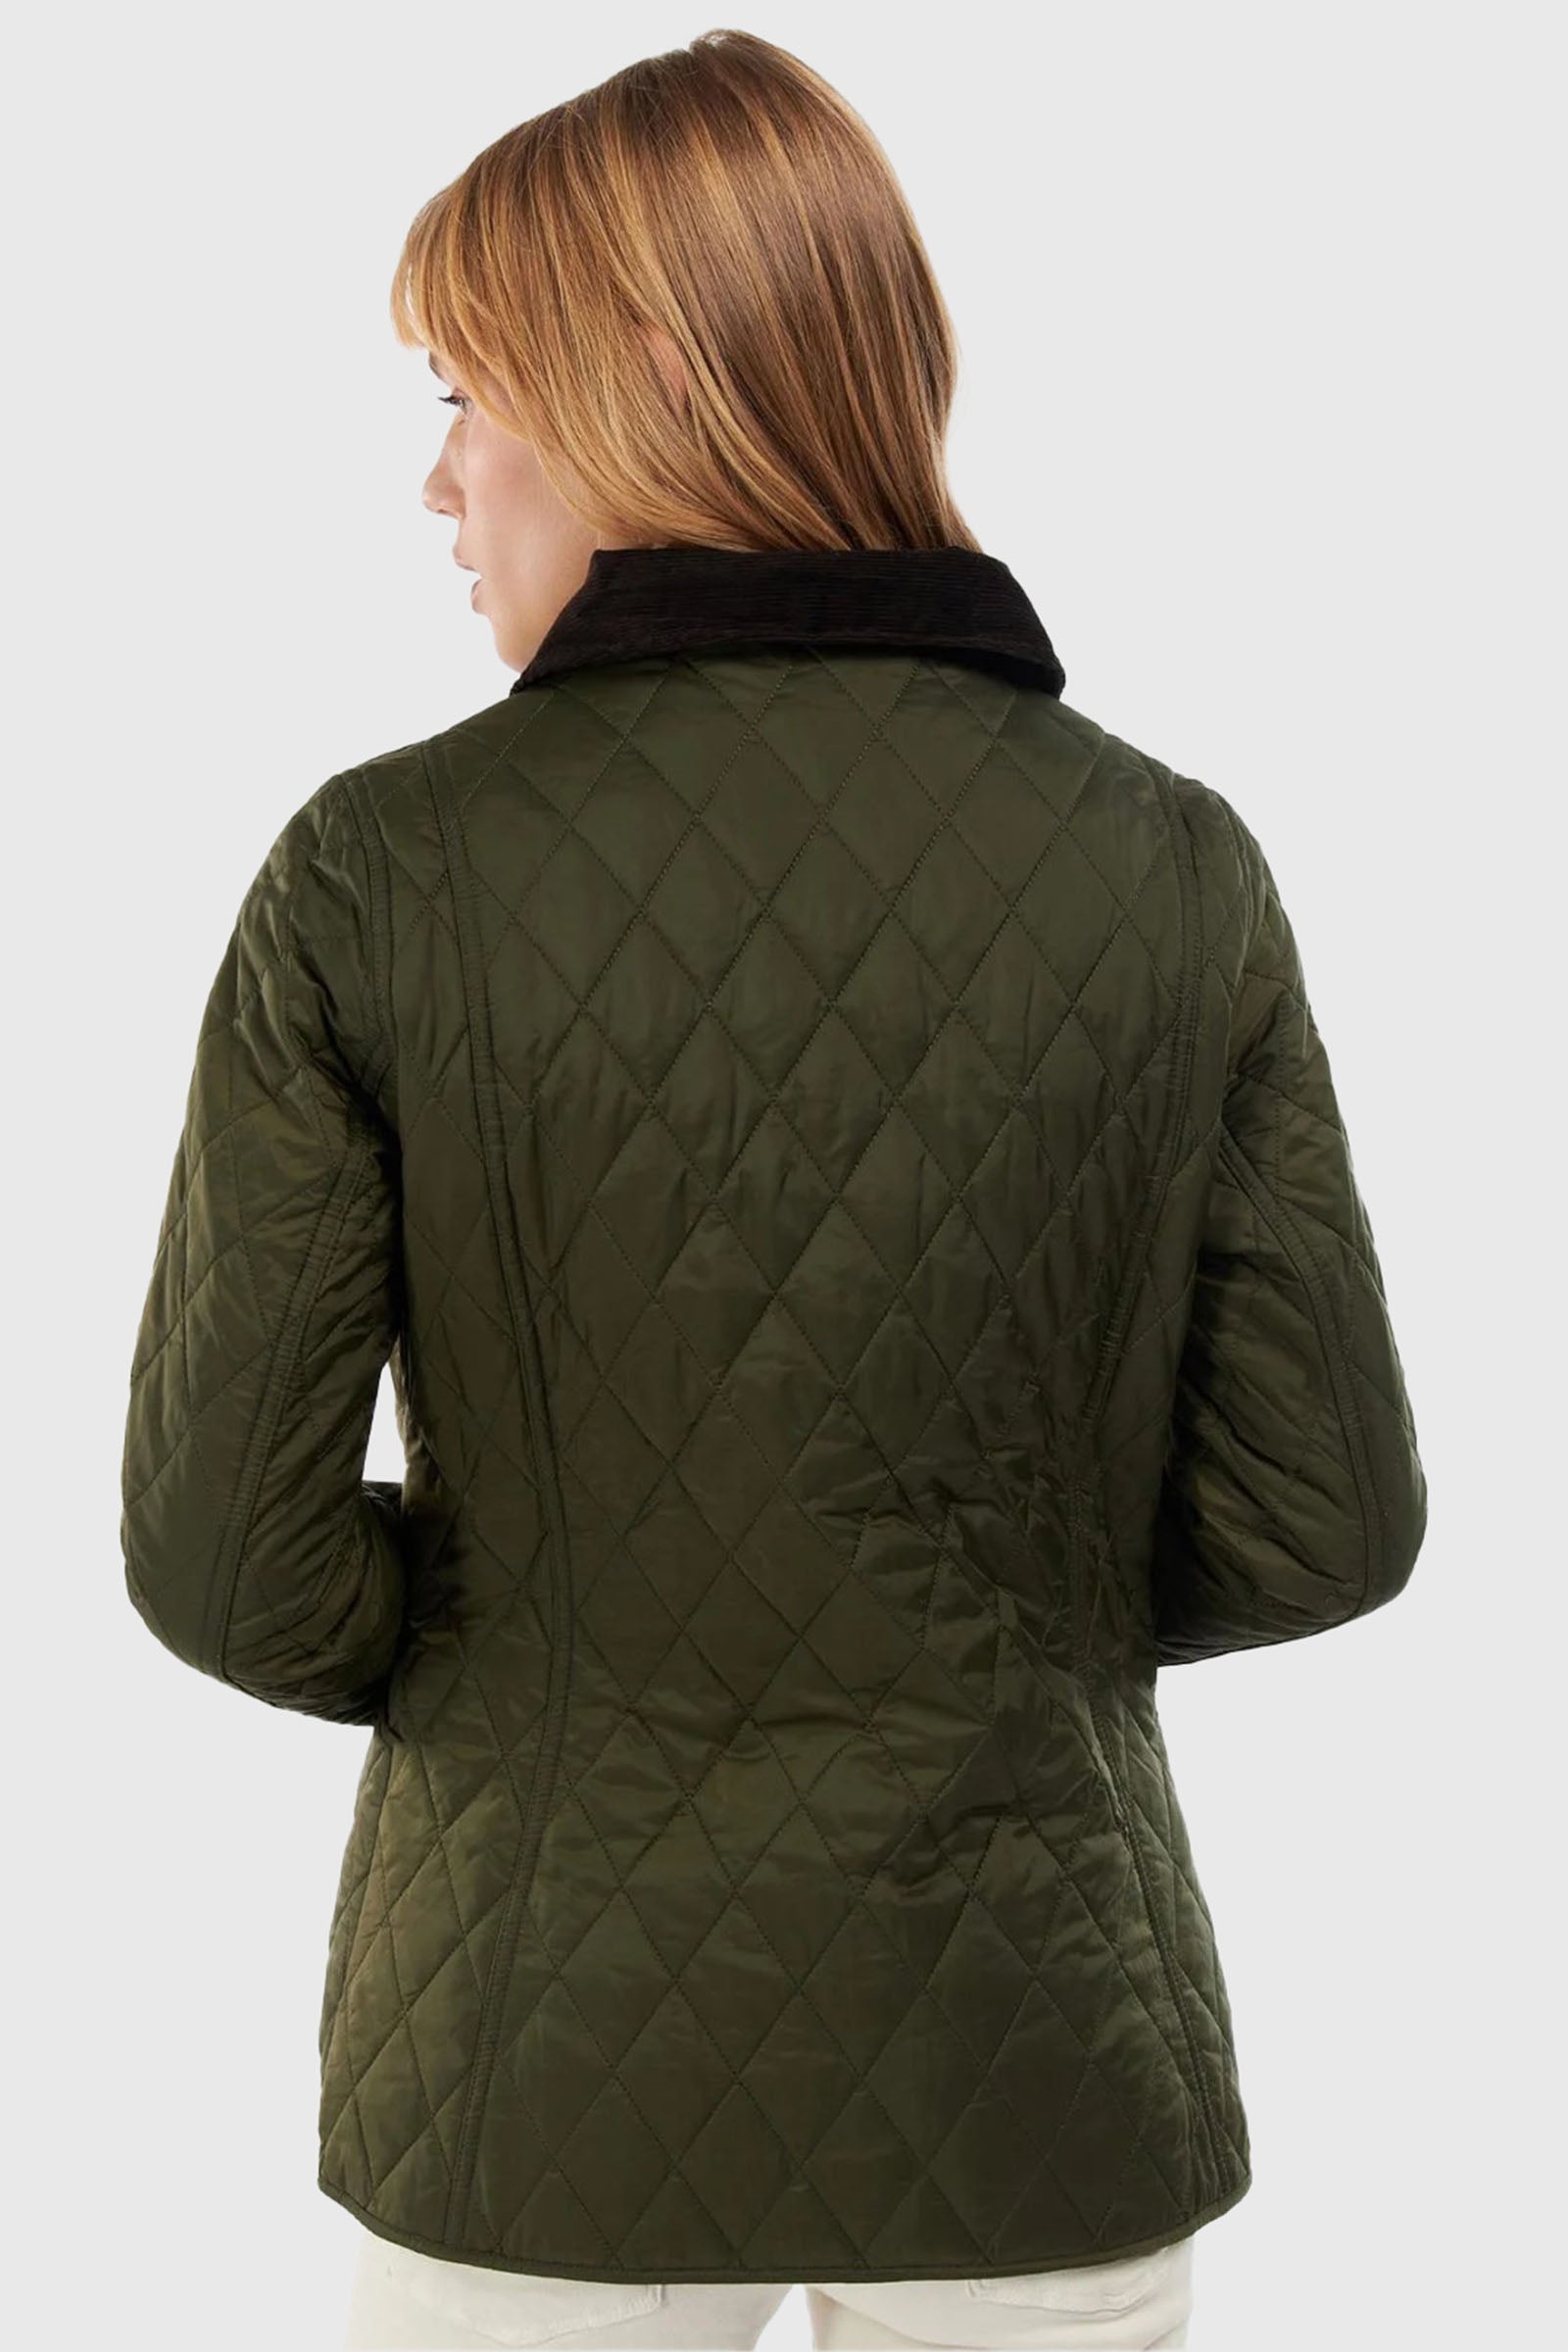 Barbour Annandale Quilted Jacket in Synthetic Olive Green - 3